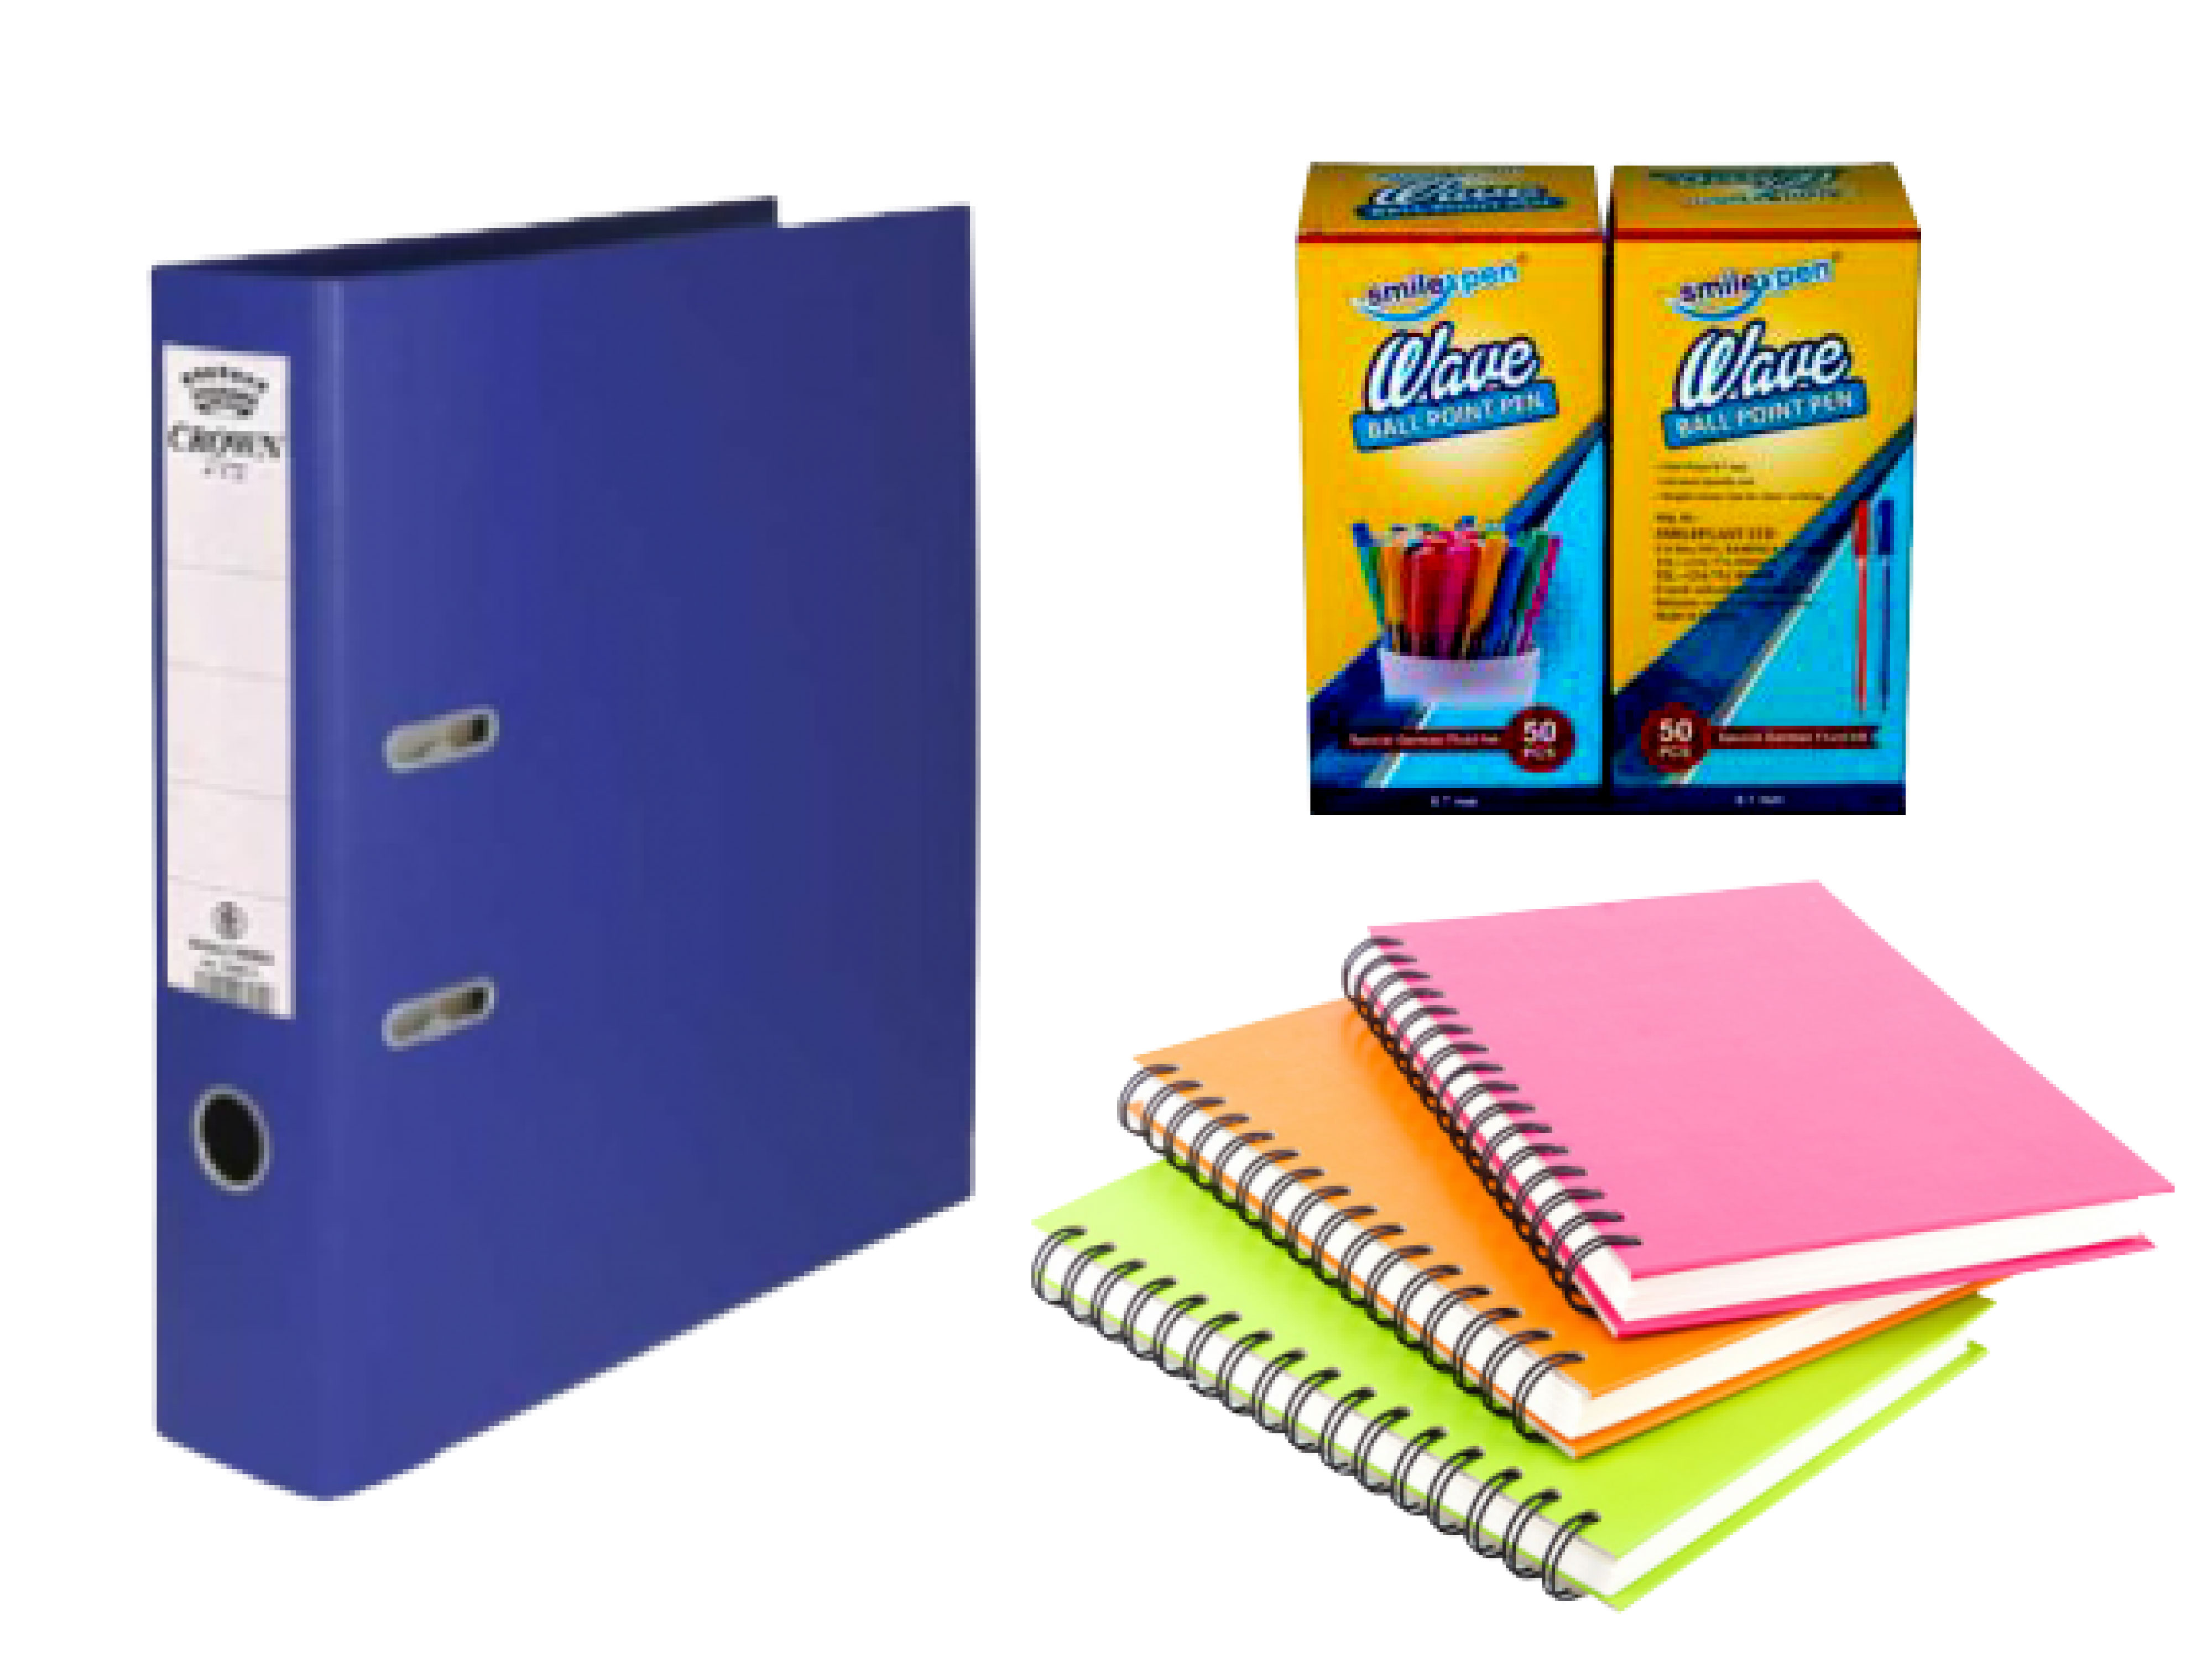 A5　SPIRAL　POINT　Logistics　BOX　Scholastic　BALL　WAVE　FOLDER,SMILE　AND　Materials　A　Digital　PENS　NOTEBOOK　eMoolo　PLASTIC